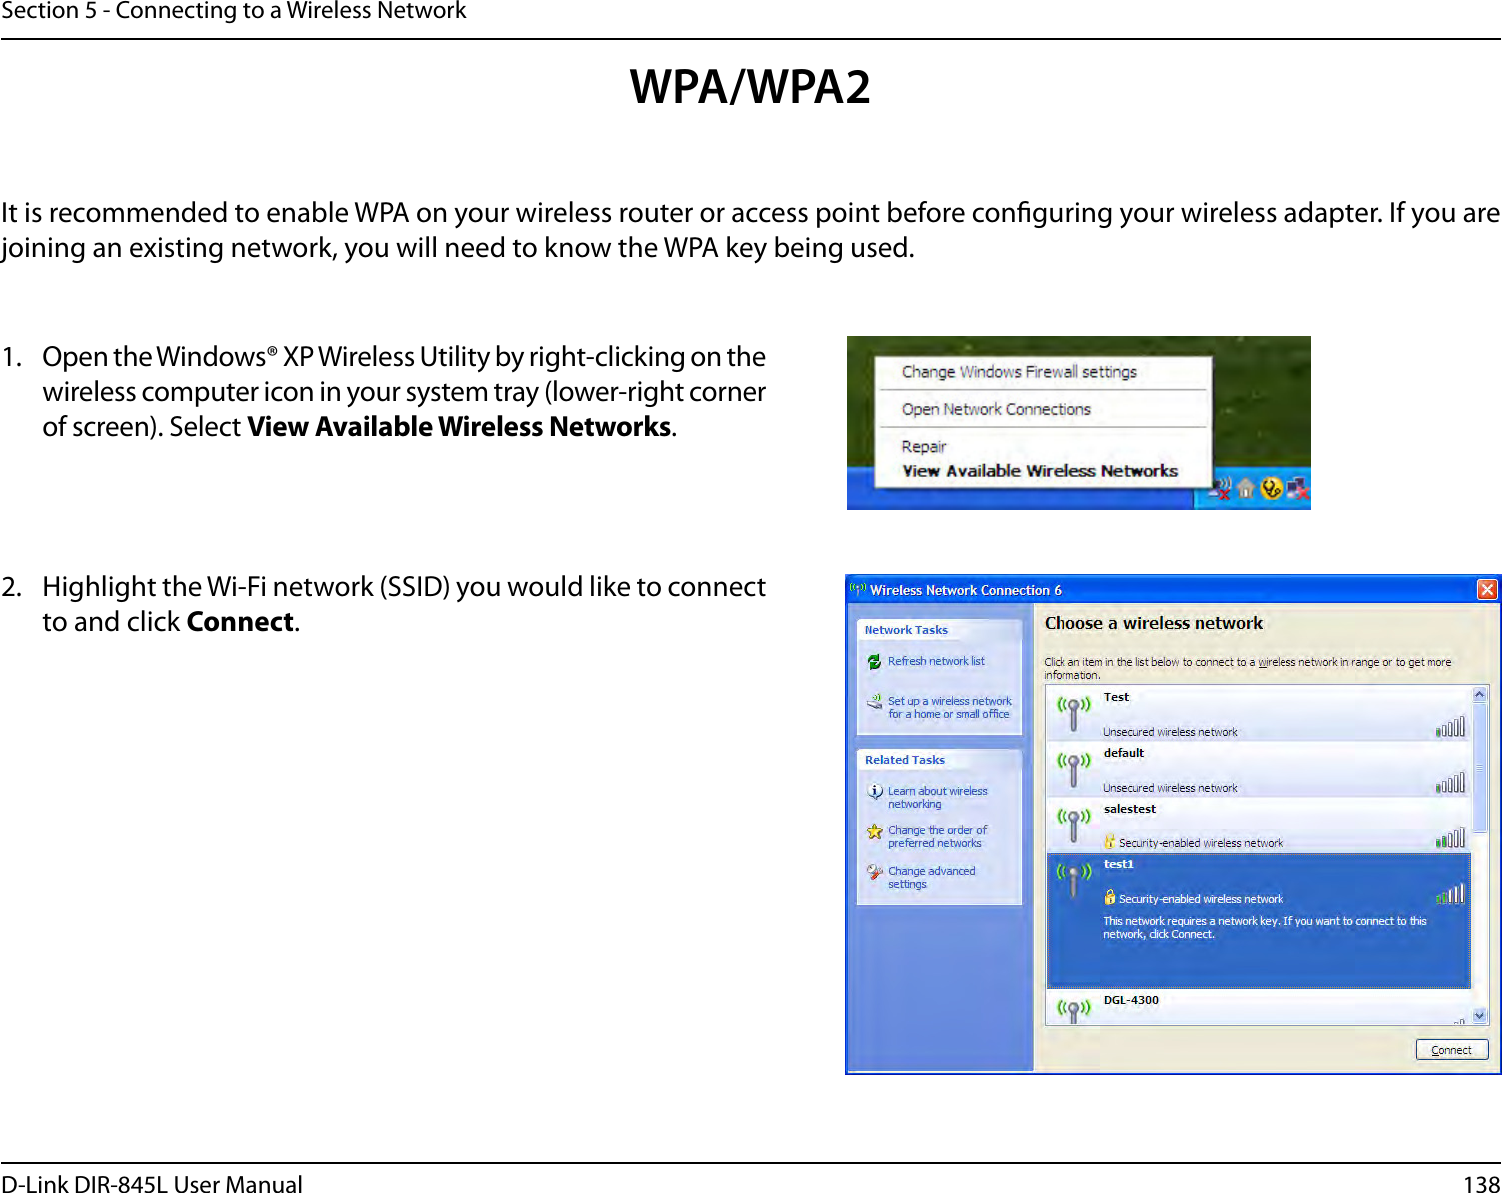 138D-Link DIR-845L User ManualSection 5 - Connecting to a Wireless NetworkIt is recommended to enable WPA on your wireless router or access point before conguring your wireless adapter. If you are joining an existing network, you will need to know the WPA key being used.2.  Highlight the Wi-Fi network (SSID) you would like to connect to and click Connect.1.  Open the Windows® XP Wireless Utility by right-clicking on the wireless computer icon in your system tray (lower-right corner of screen). Select View Available Wireless Networks. WPA/WPA2